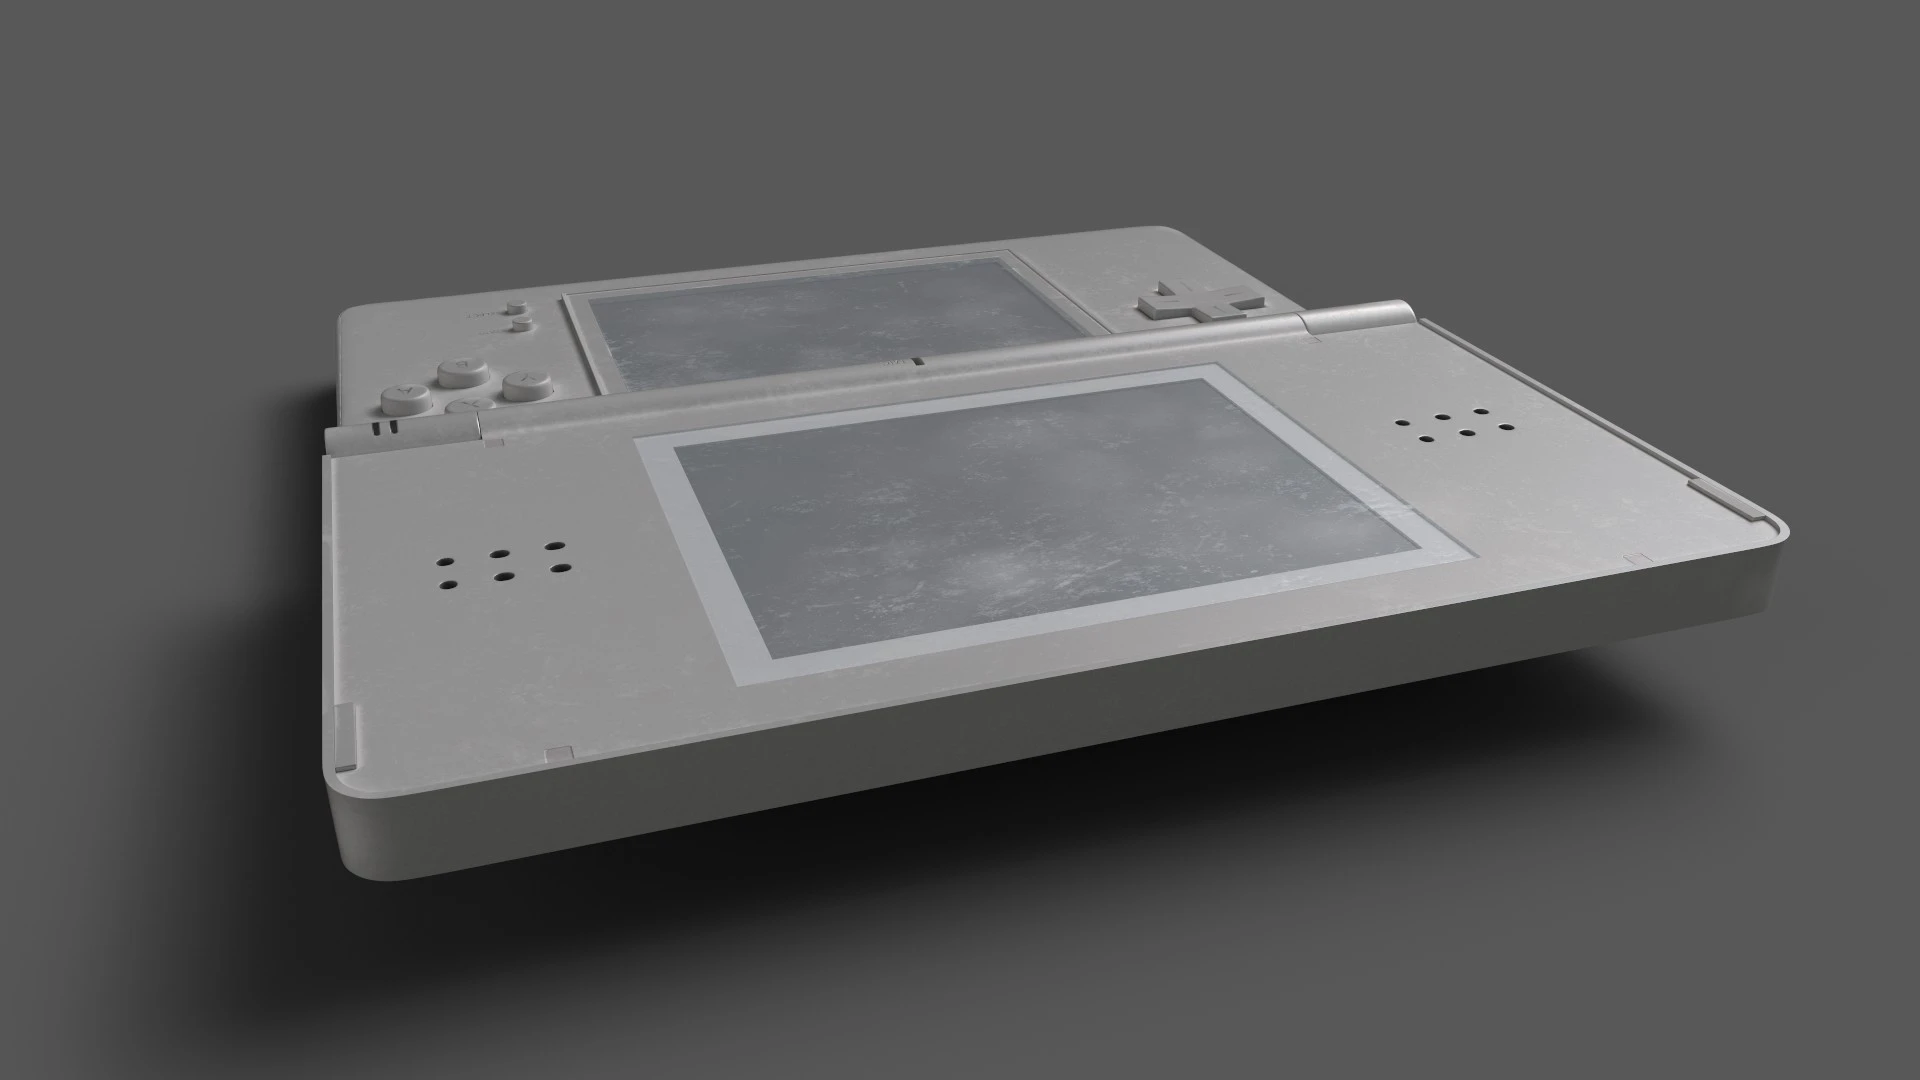 Dirty 3d render of a DS n3